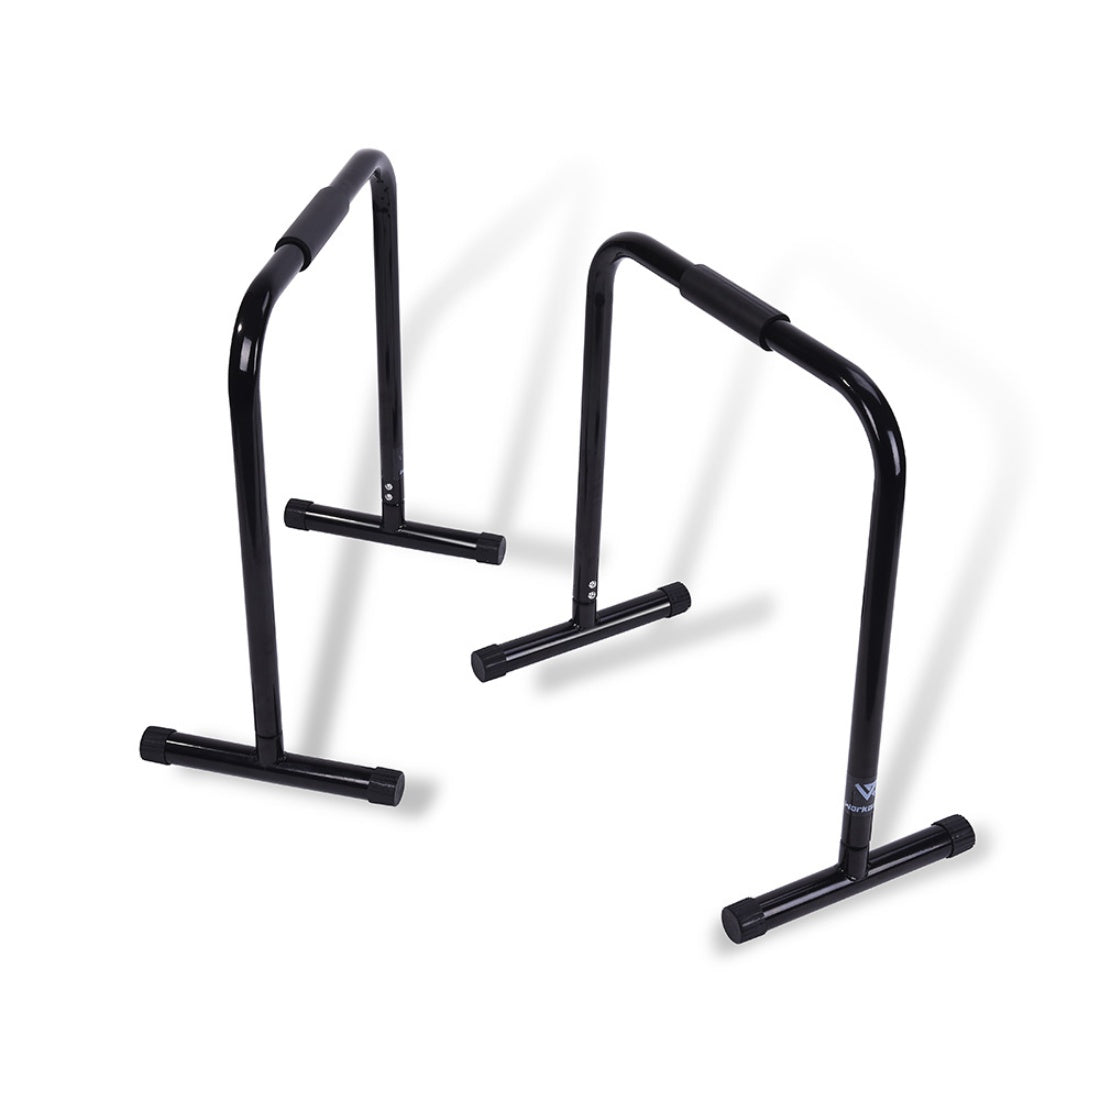 Parallette Stand Parallel Bars Chin Push Equaliser Cross Training Strength Gym